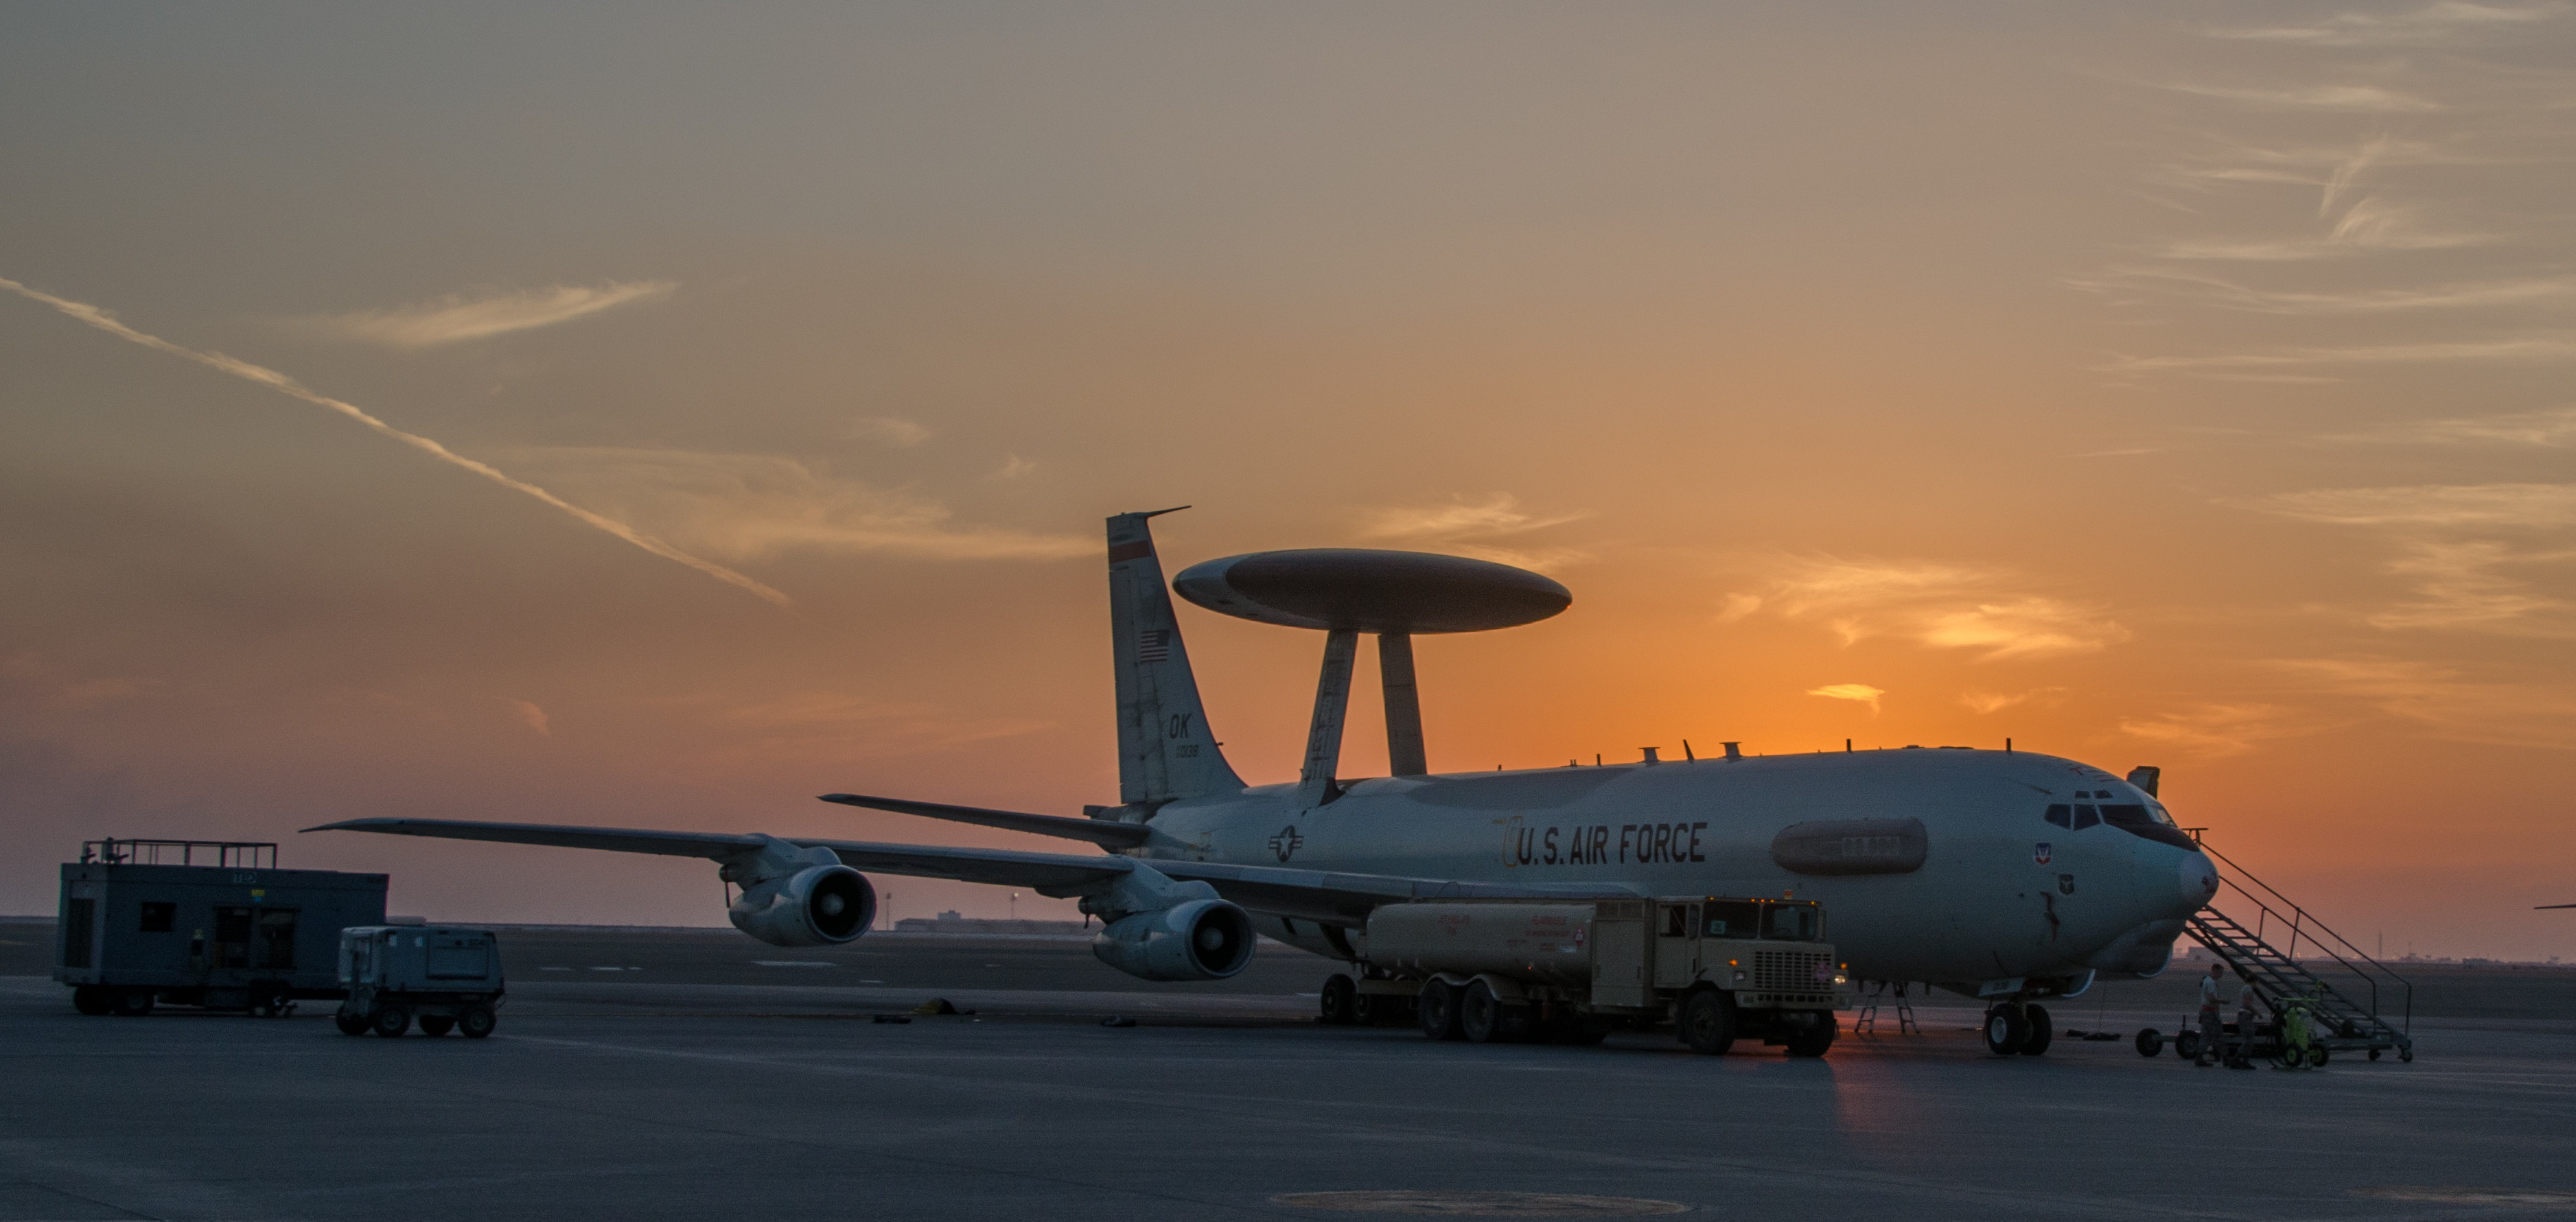 Aircraft on ground in front of sunset